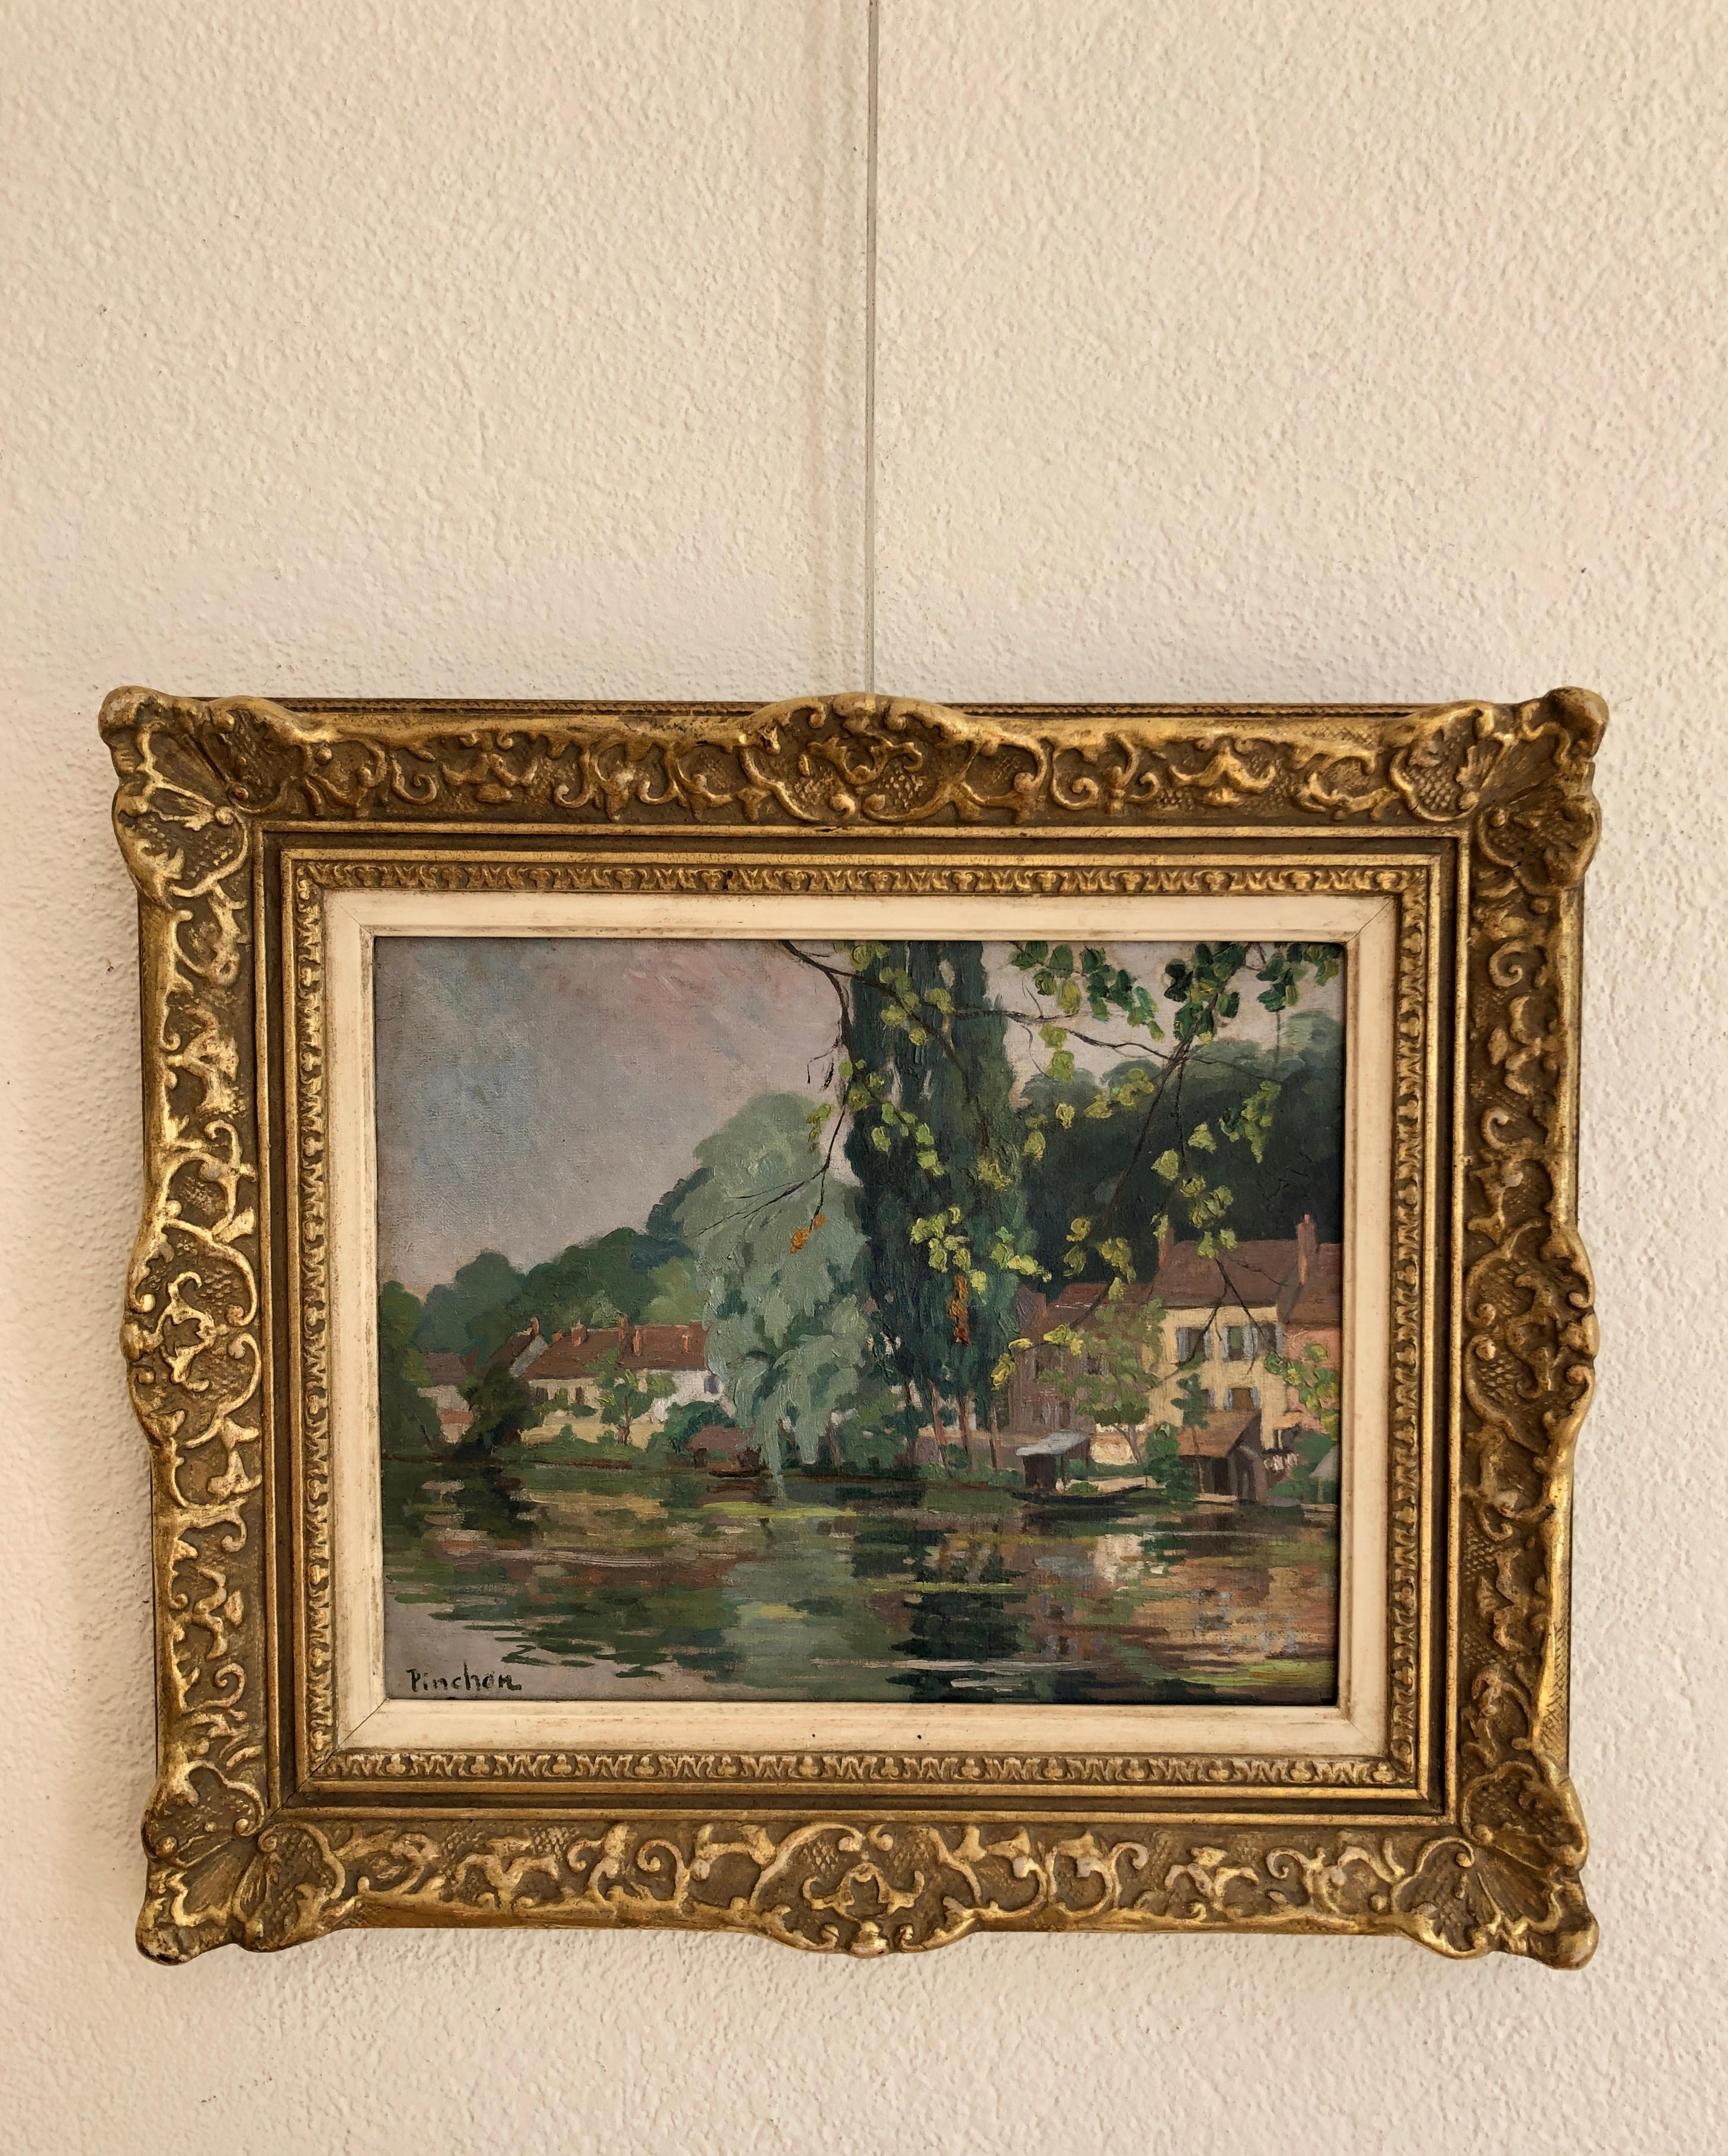 Landscape at the water's edge - Painting by Pinchon